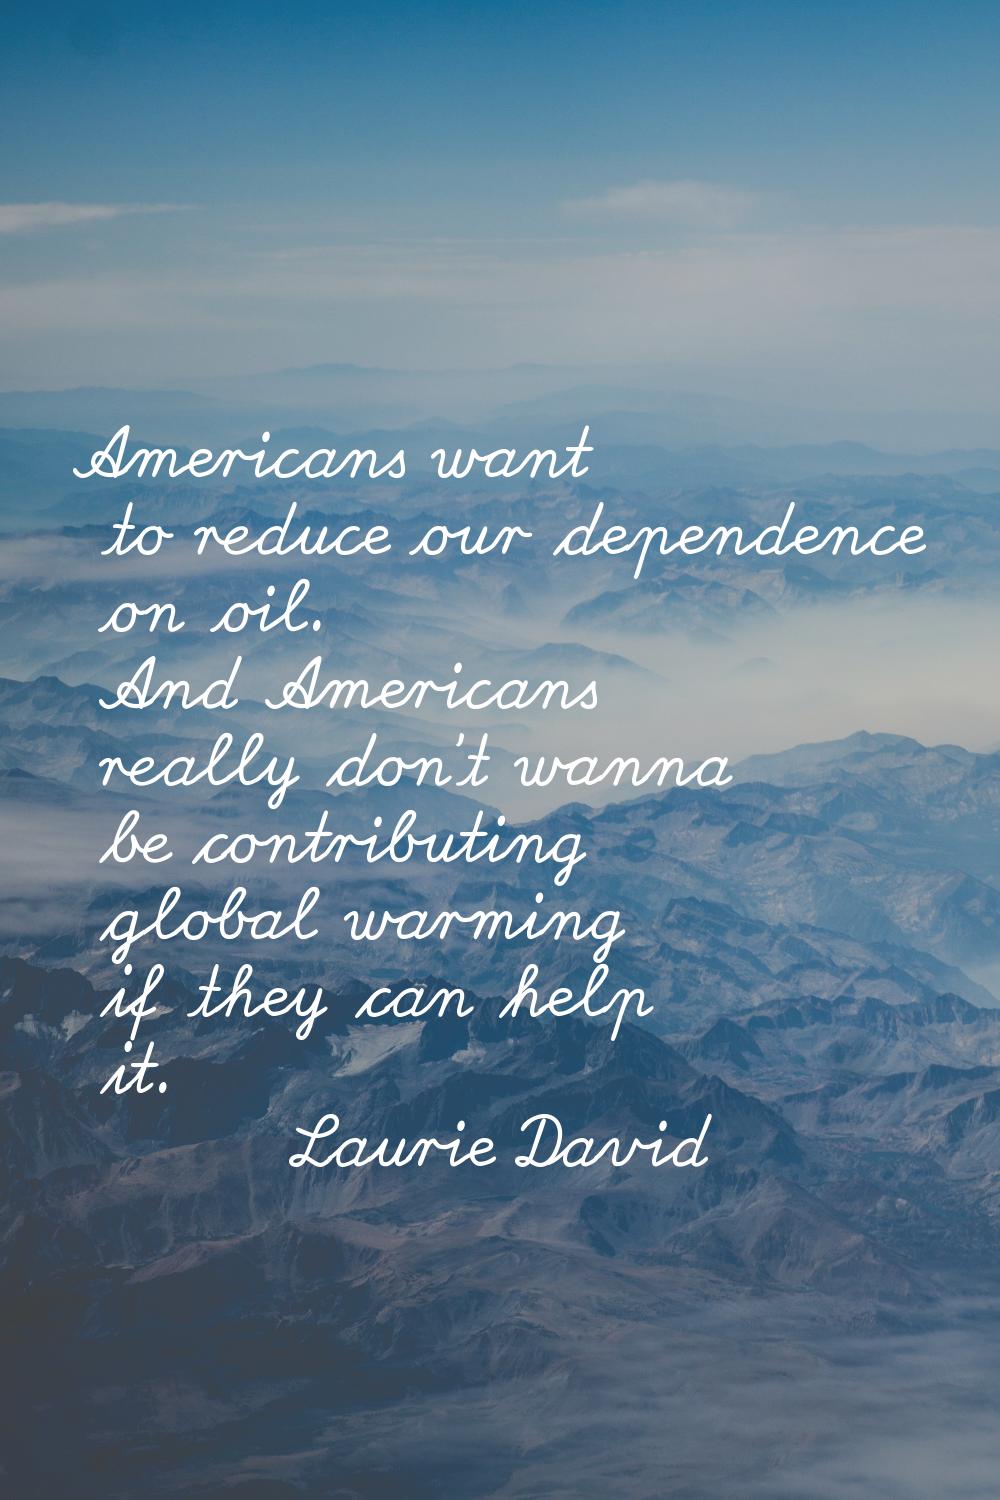 Americans want to reduce our dependence on oil. And Americans really don't wanna be contributing gl